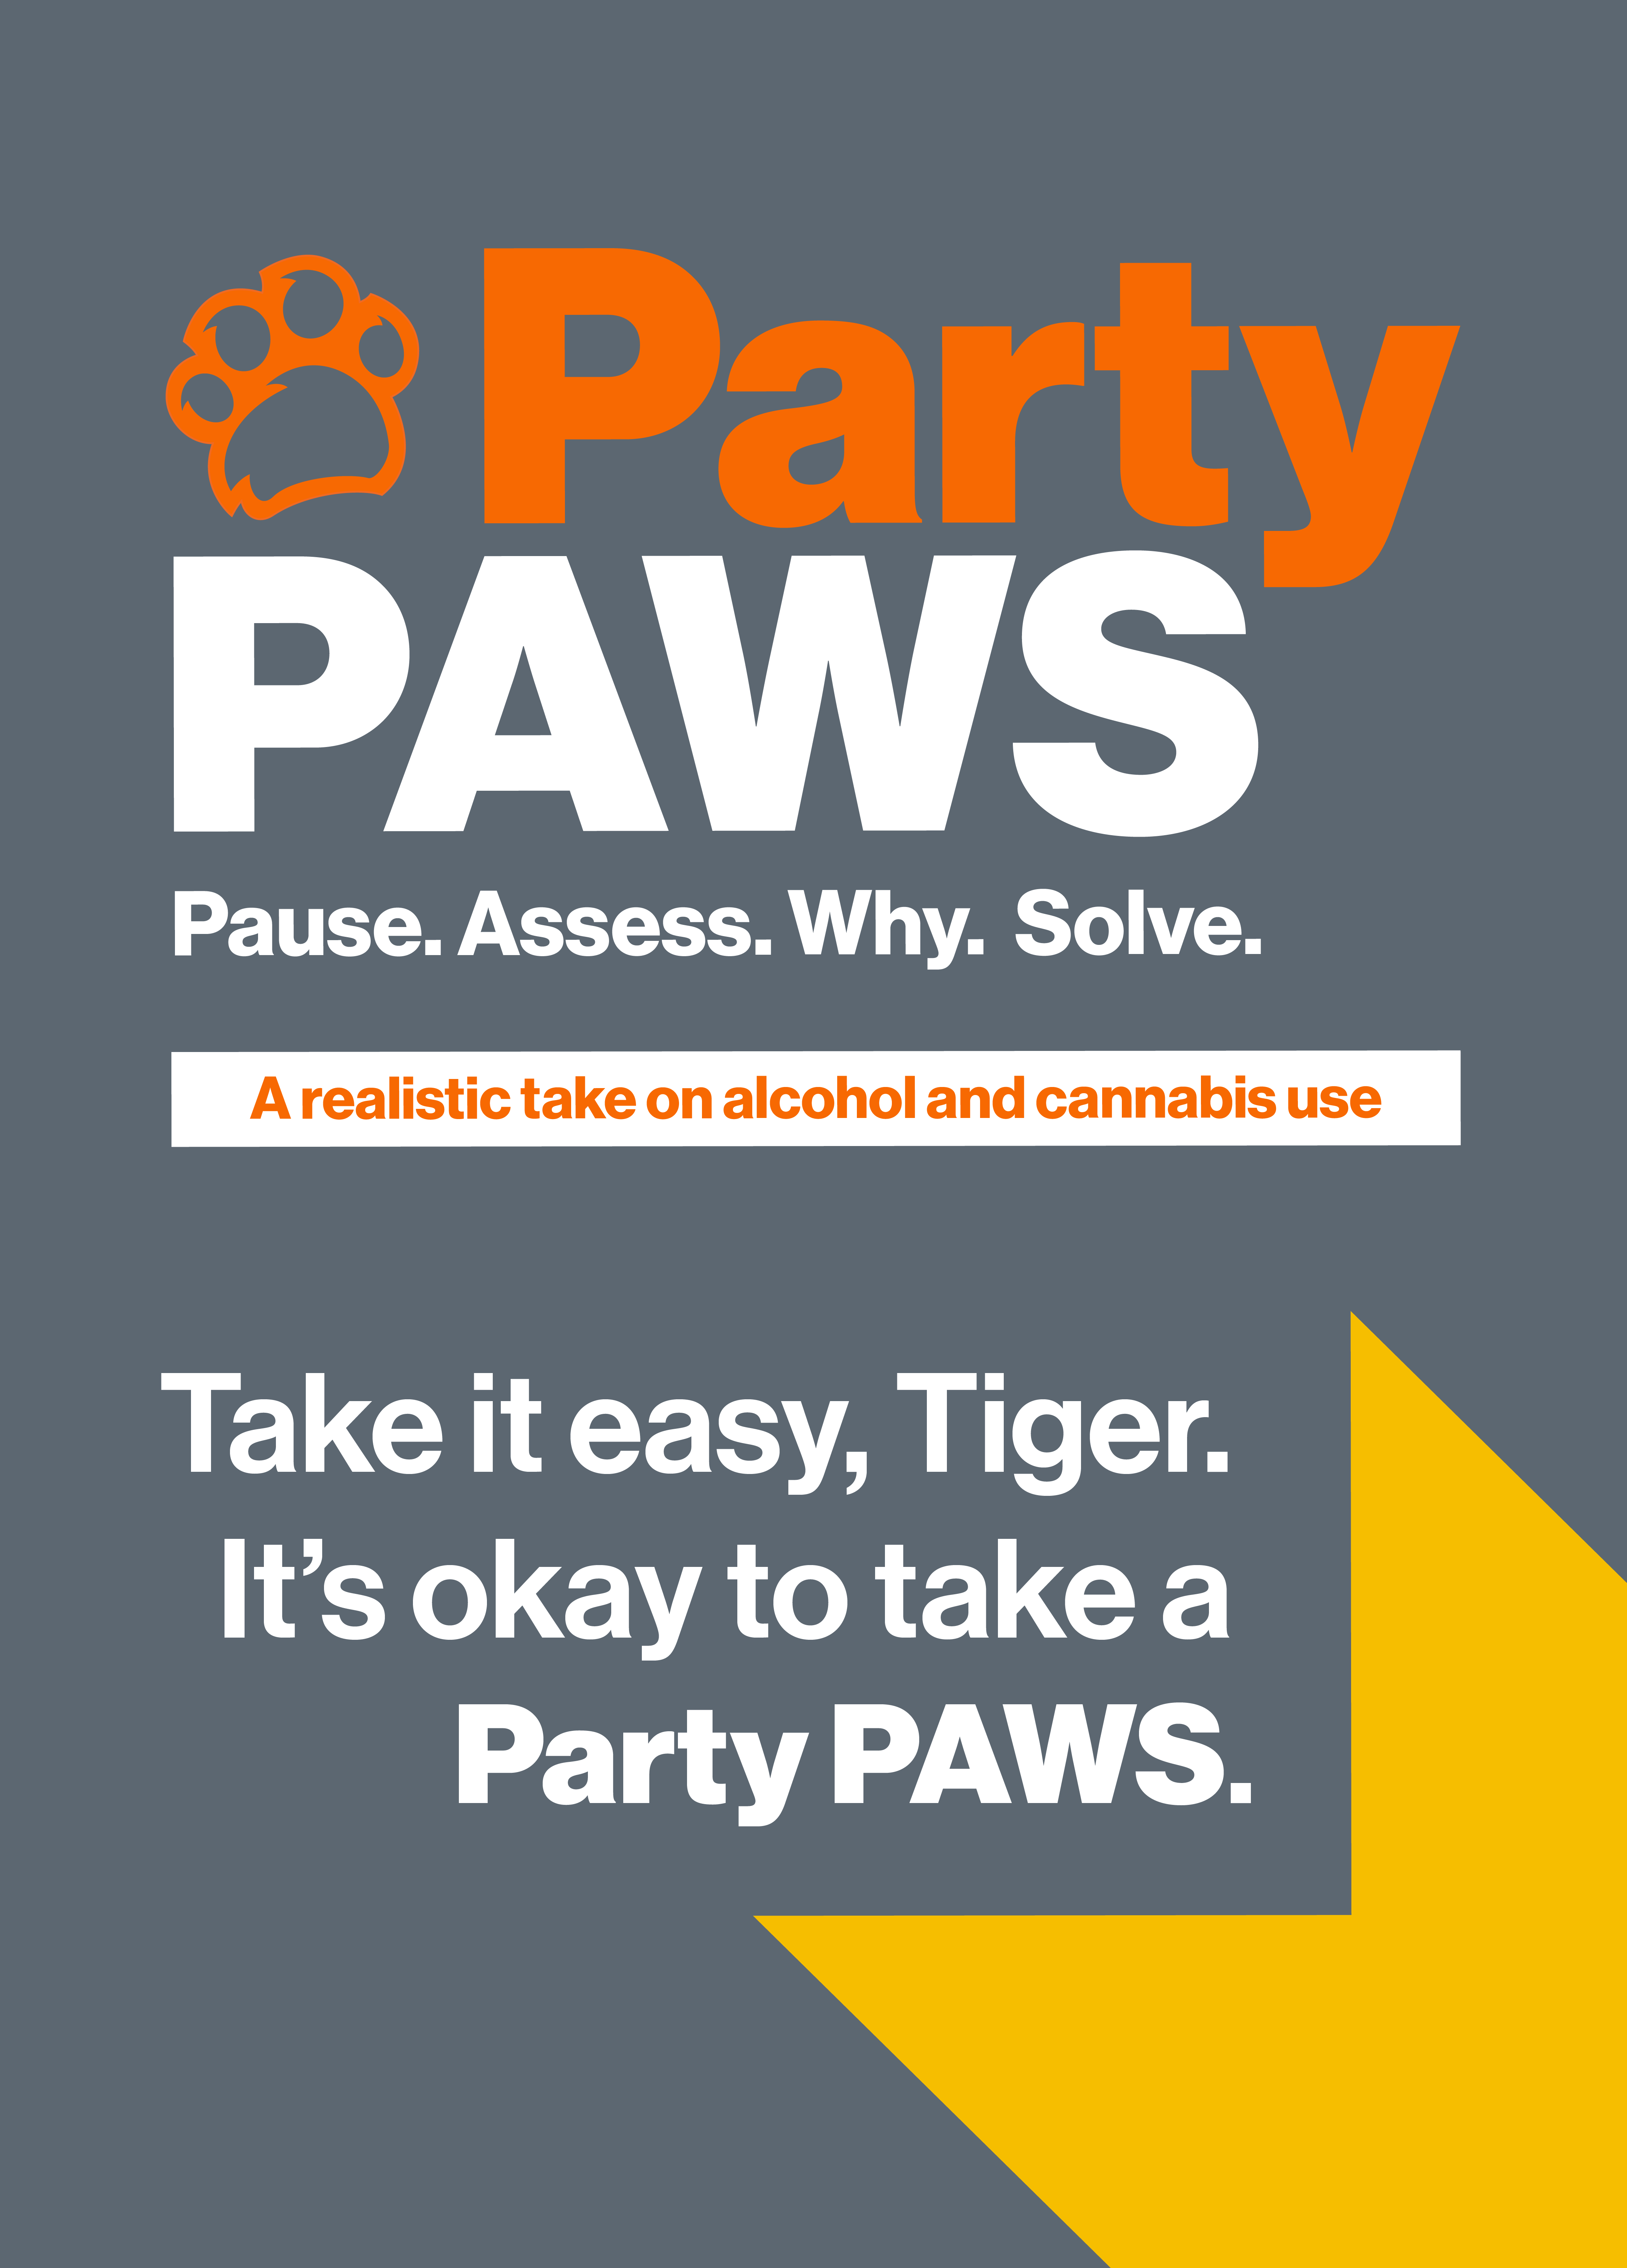 Party PAWS a realistic take on alcohol and cannabis education